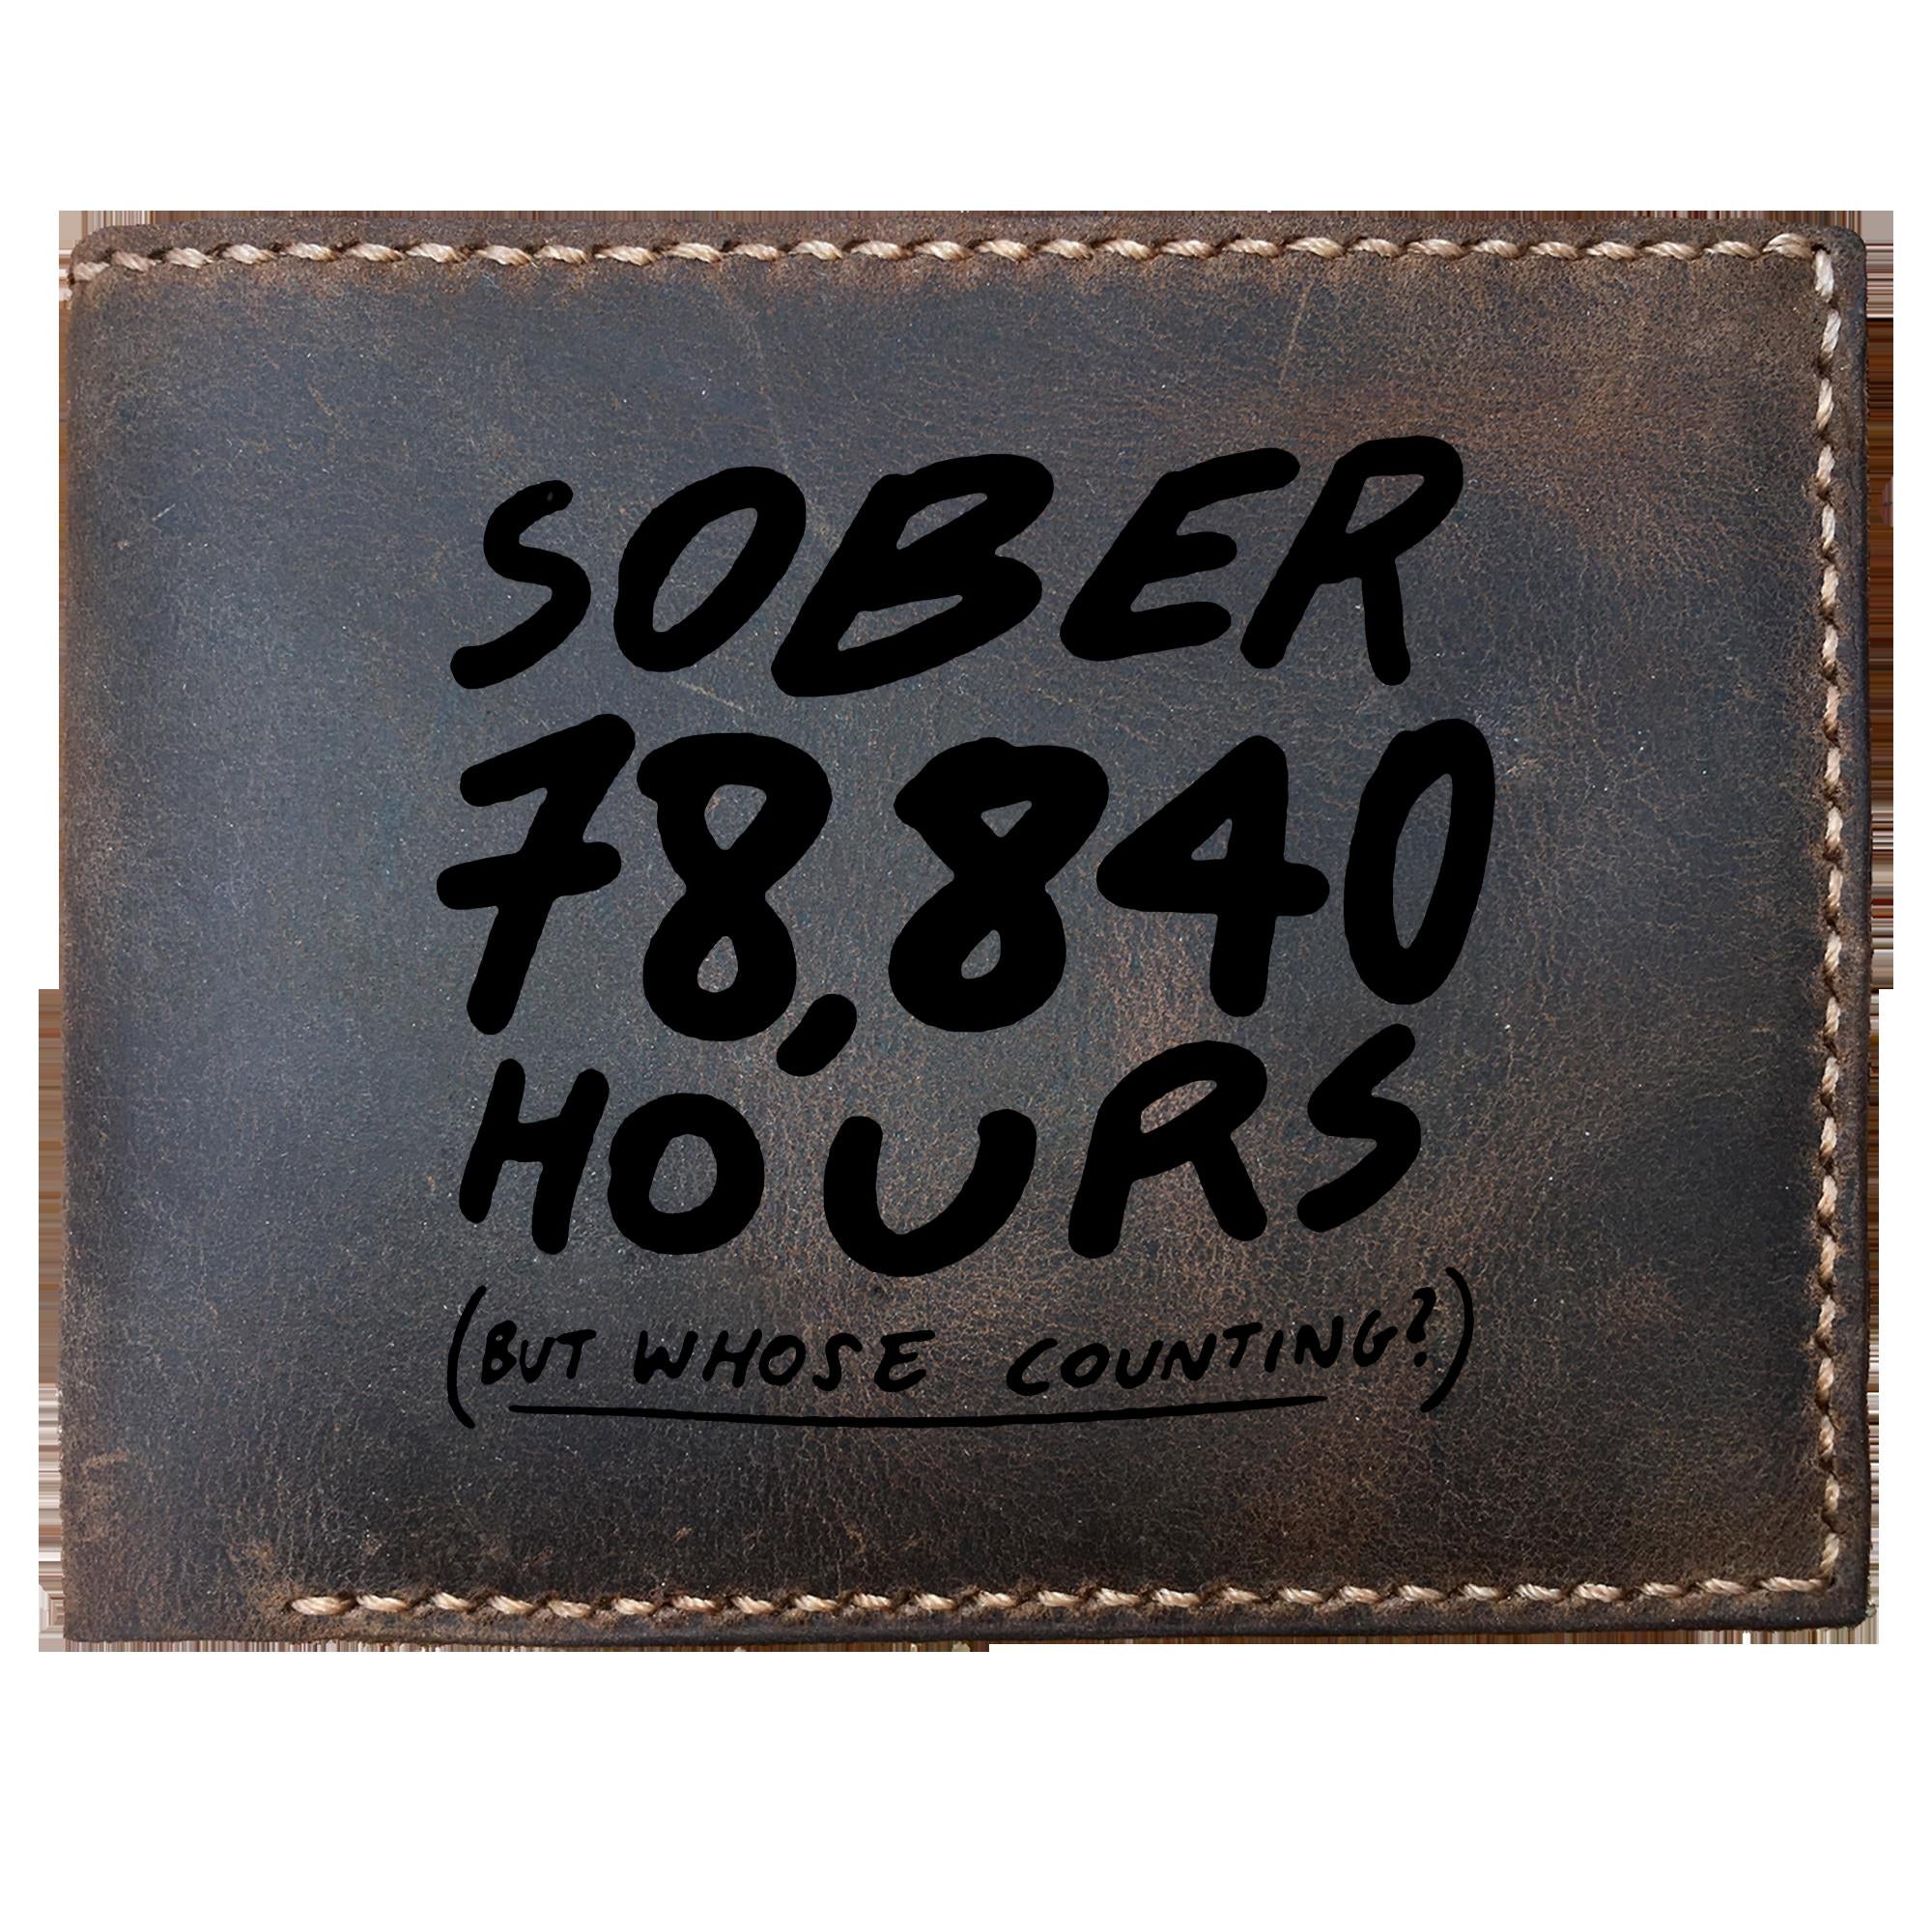 Skitongifts Funny Custom Laser Engraved Bifold Leather Wallet For Men, Sober 78840 Hours